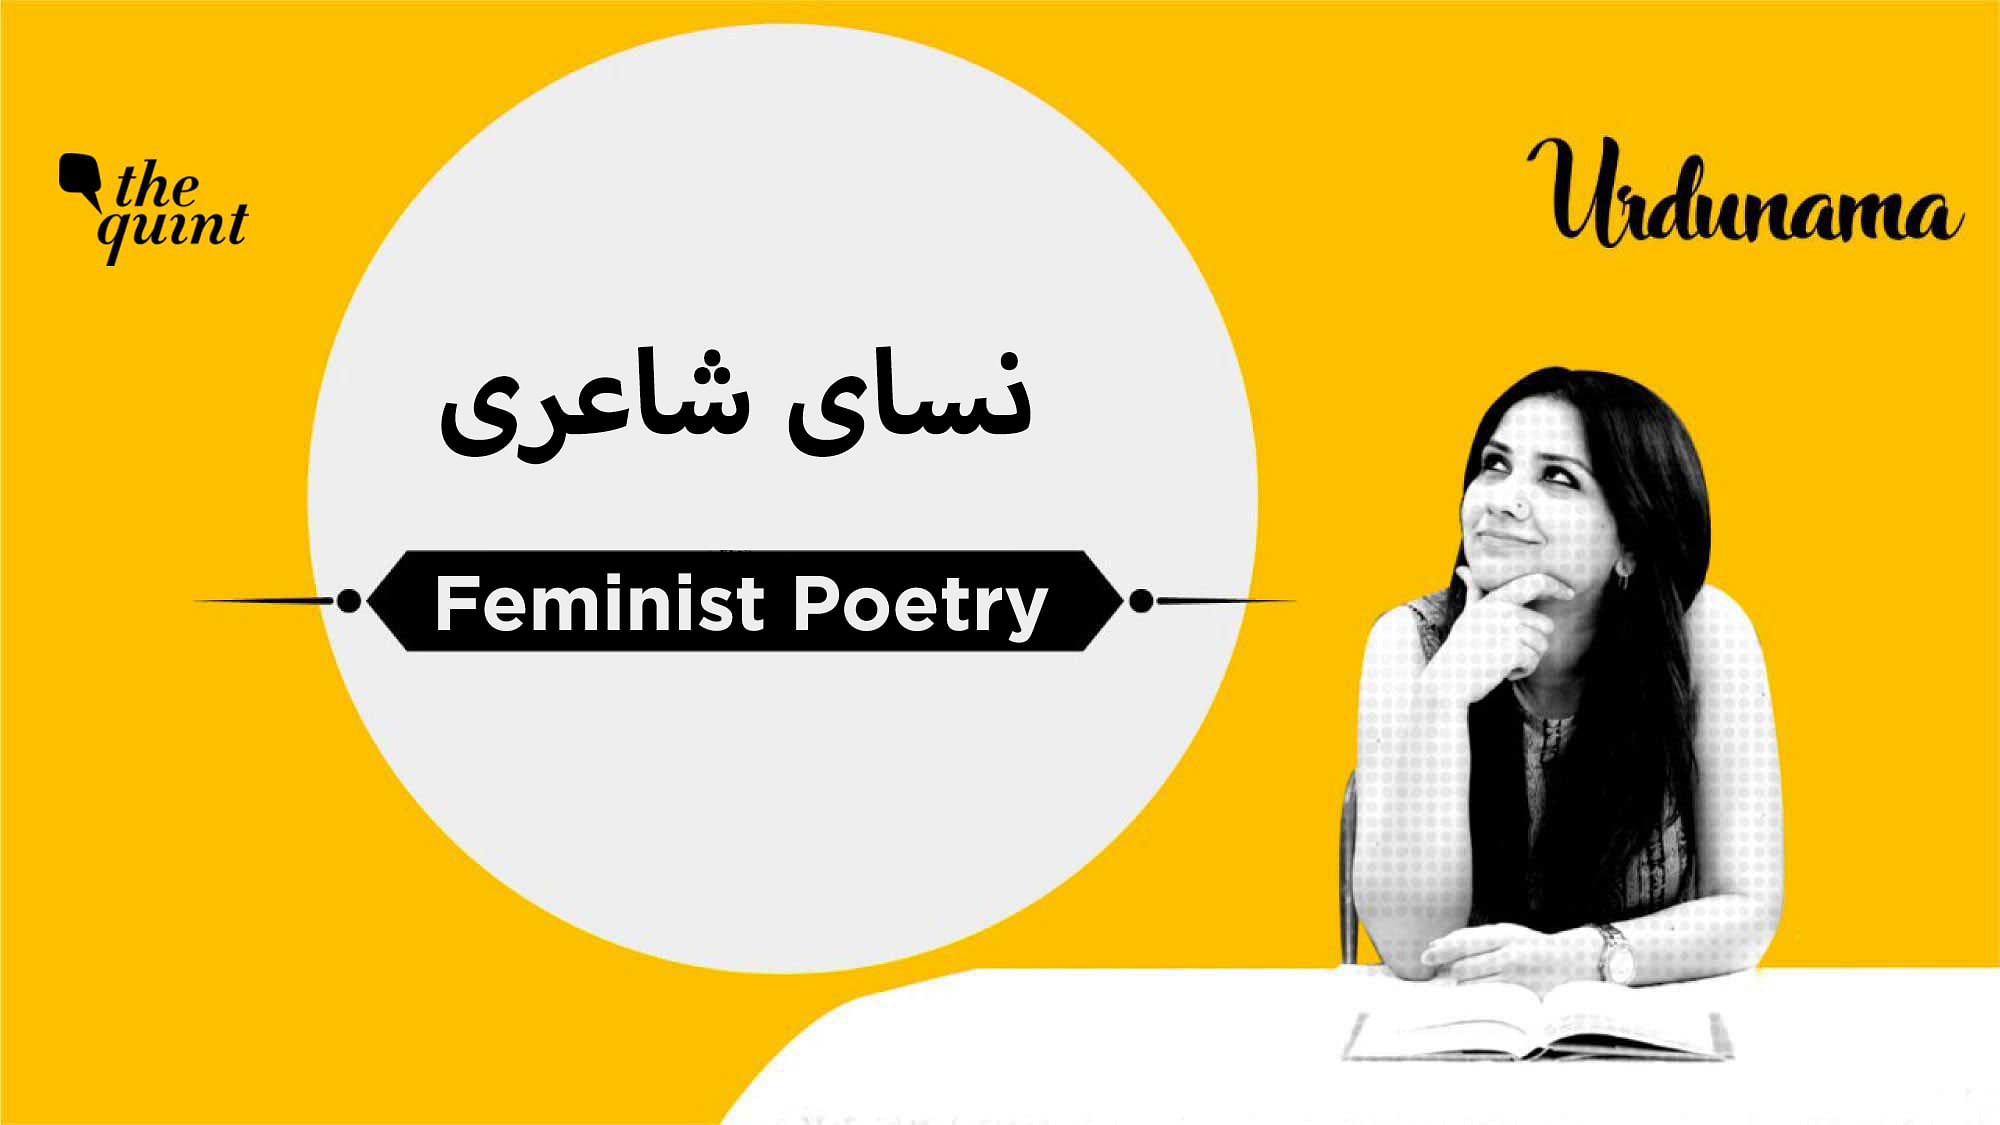 Tune in for the<i> ashaar </i>of female poets like Ada Jafferey, Fehmida Riaz, and others.